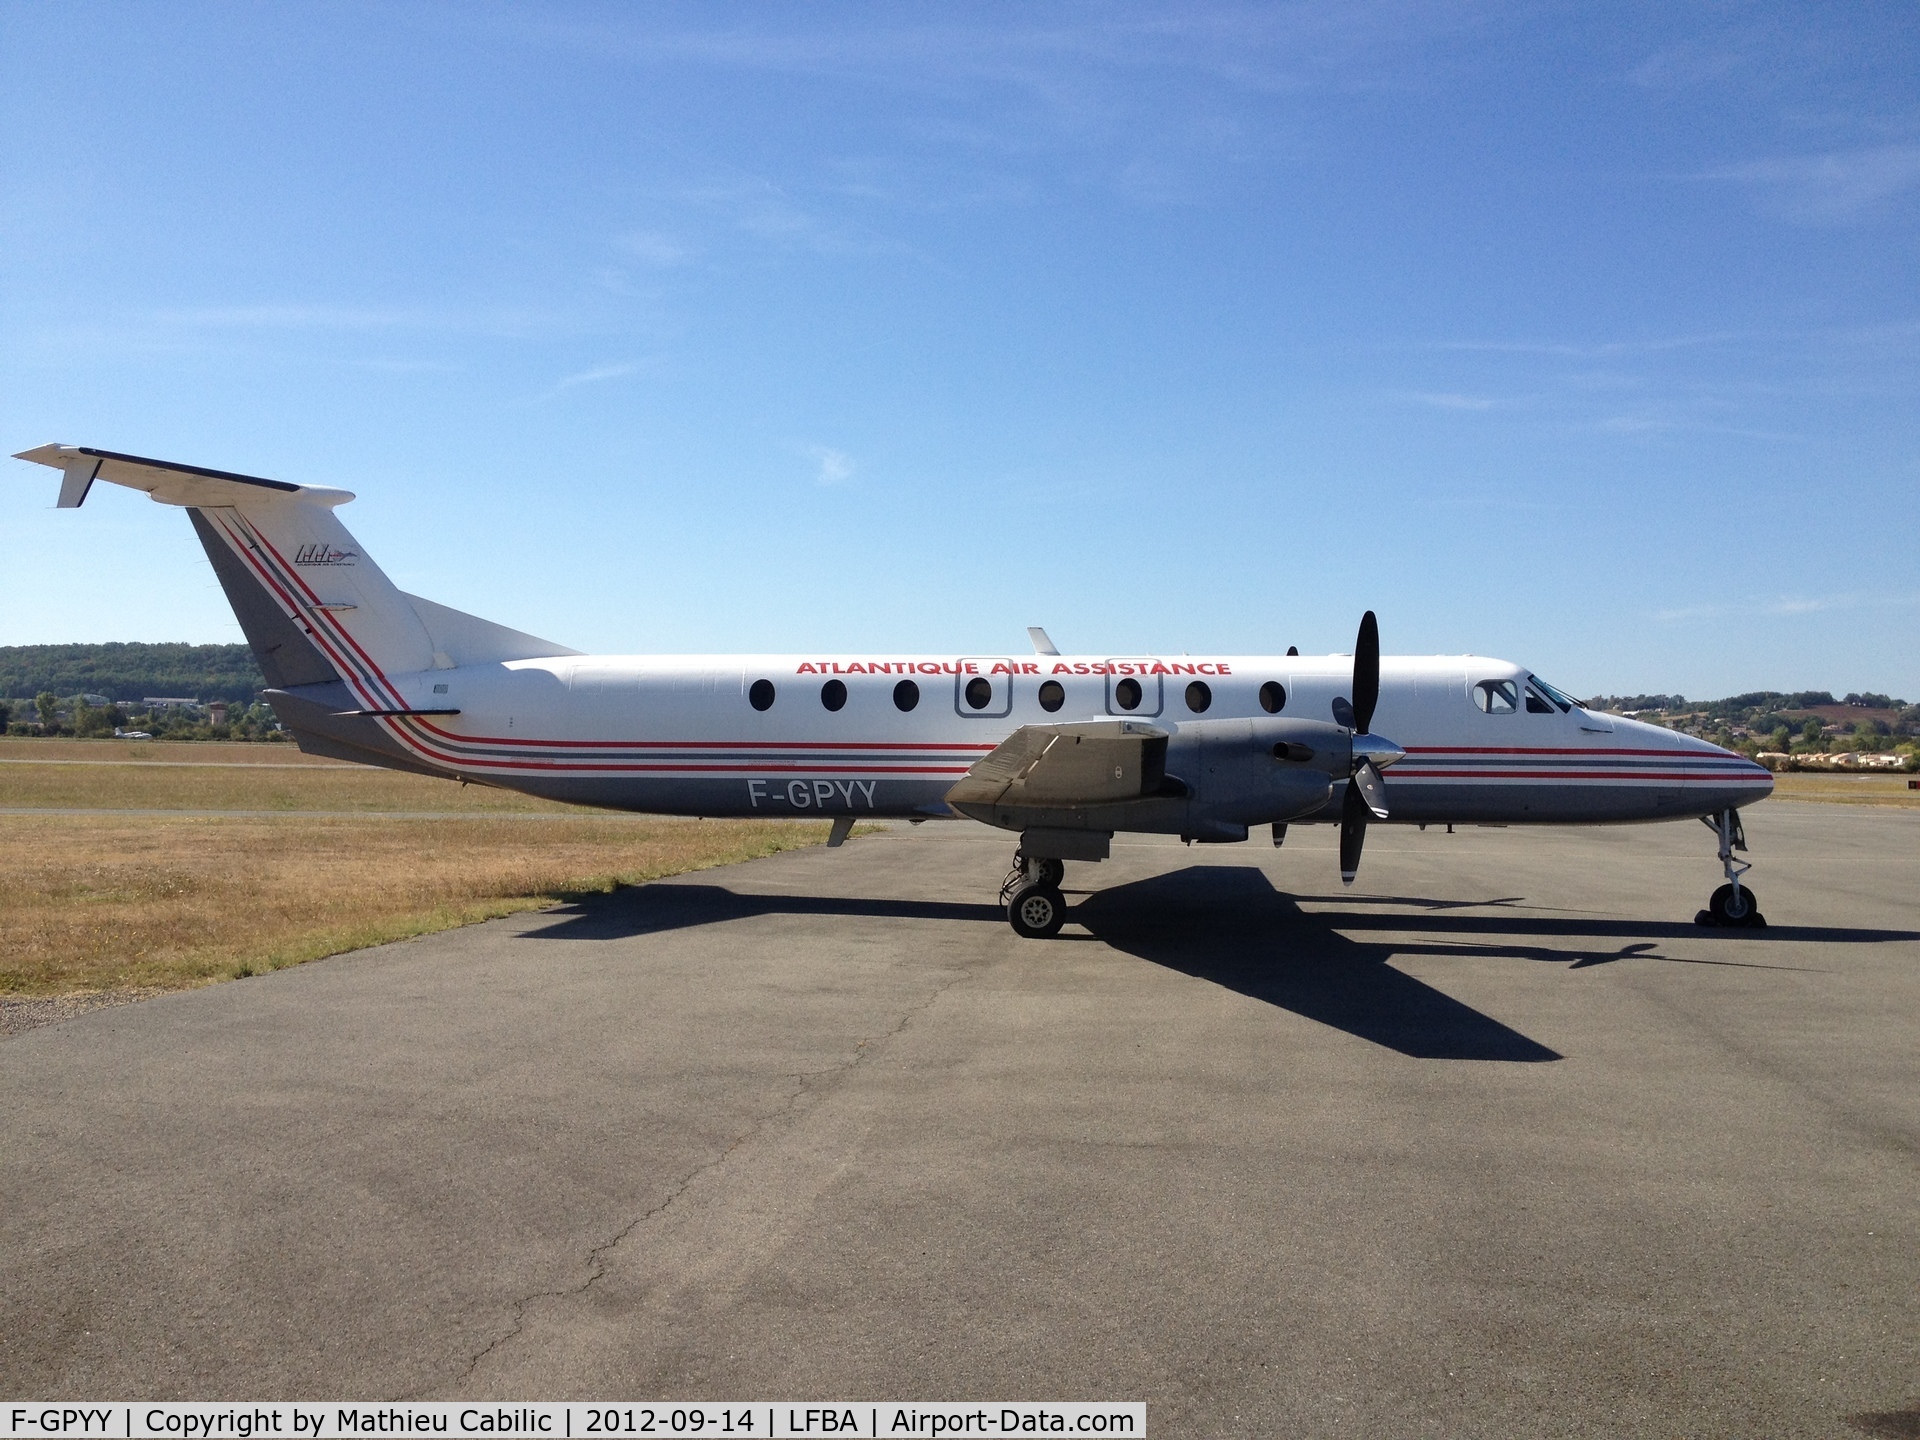 F-GPYY, 1990 Beech 1900C-1 C/N UC-115, ATLANTIQUE AIR ASSISTANCE  in Airways Formation apron